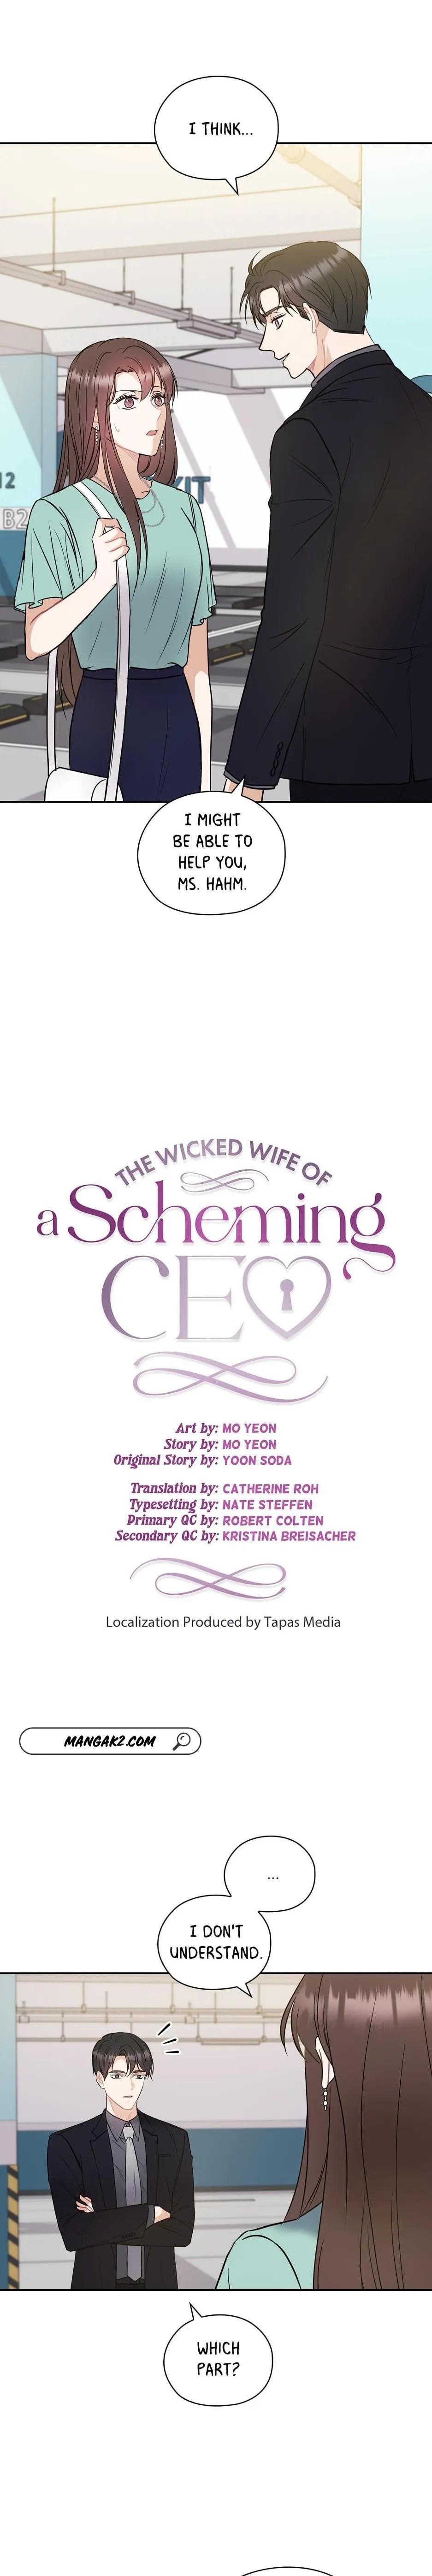 The Wicked Wife Of A Scheming Ceo - Page 1